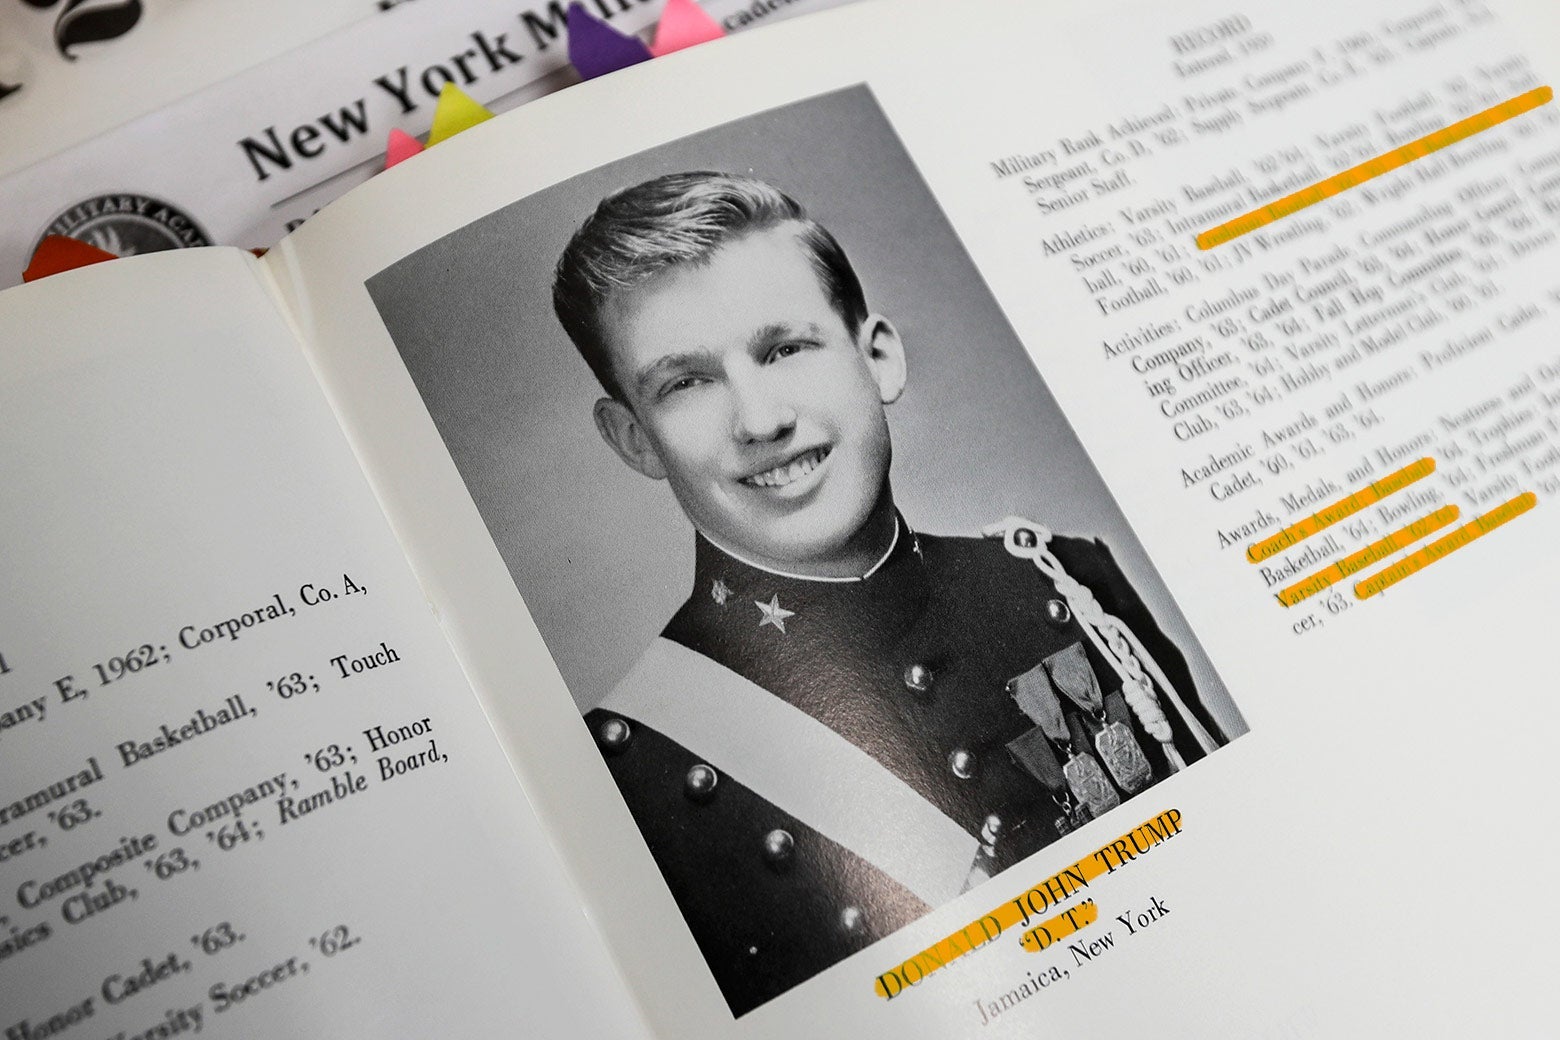 Donald Trump's yearbook photo as a cadet at the New York Military Academy.